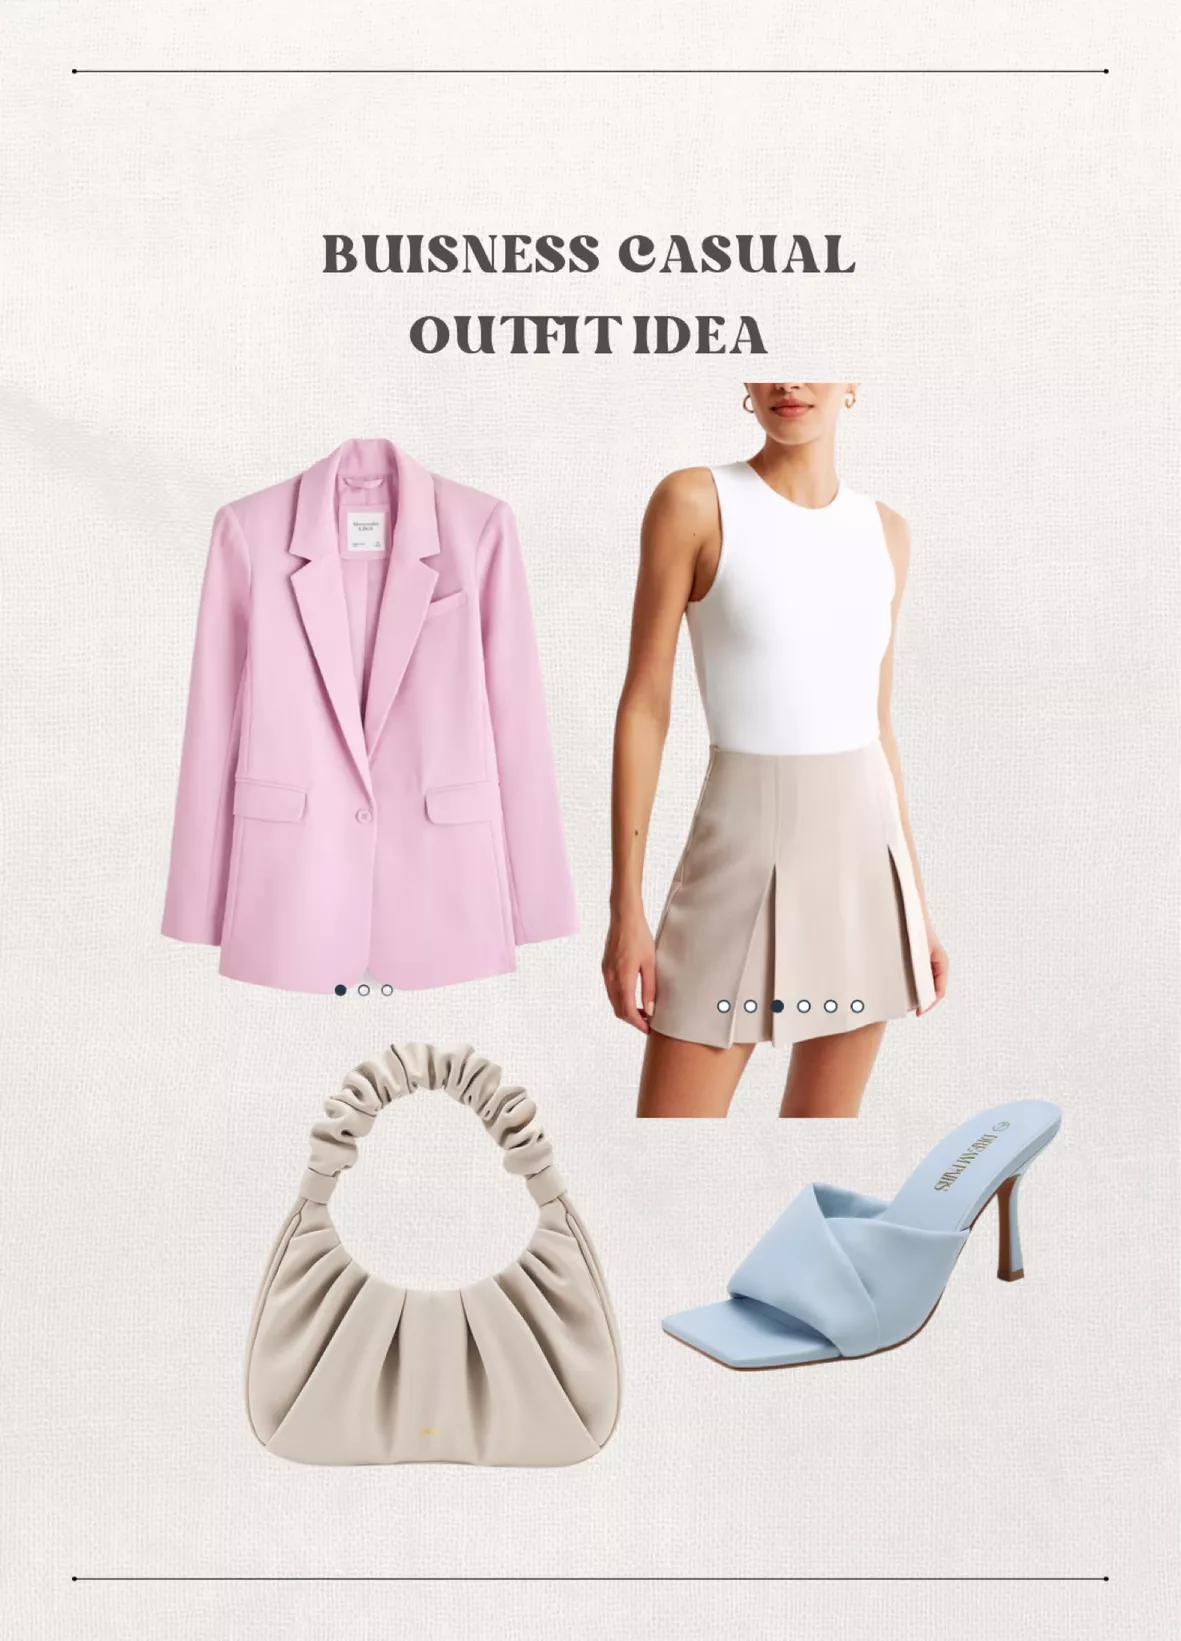 A Cute Business Casual Outfit